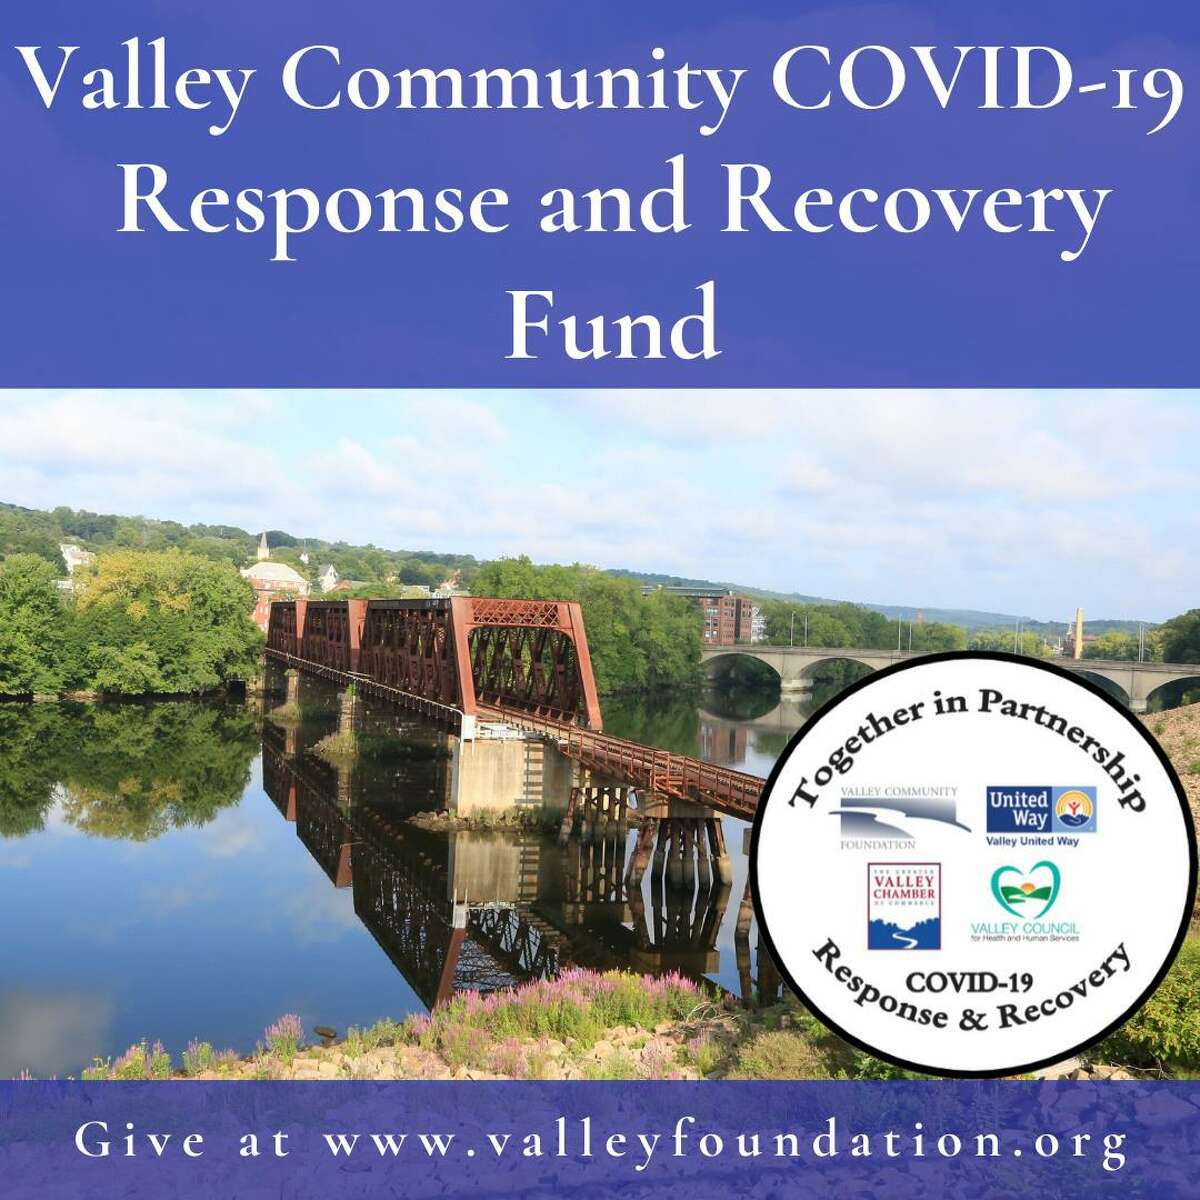 The Valley Community COVID-19 Response and Recovery Fund is accepting applications from non-profits seeking grant money.